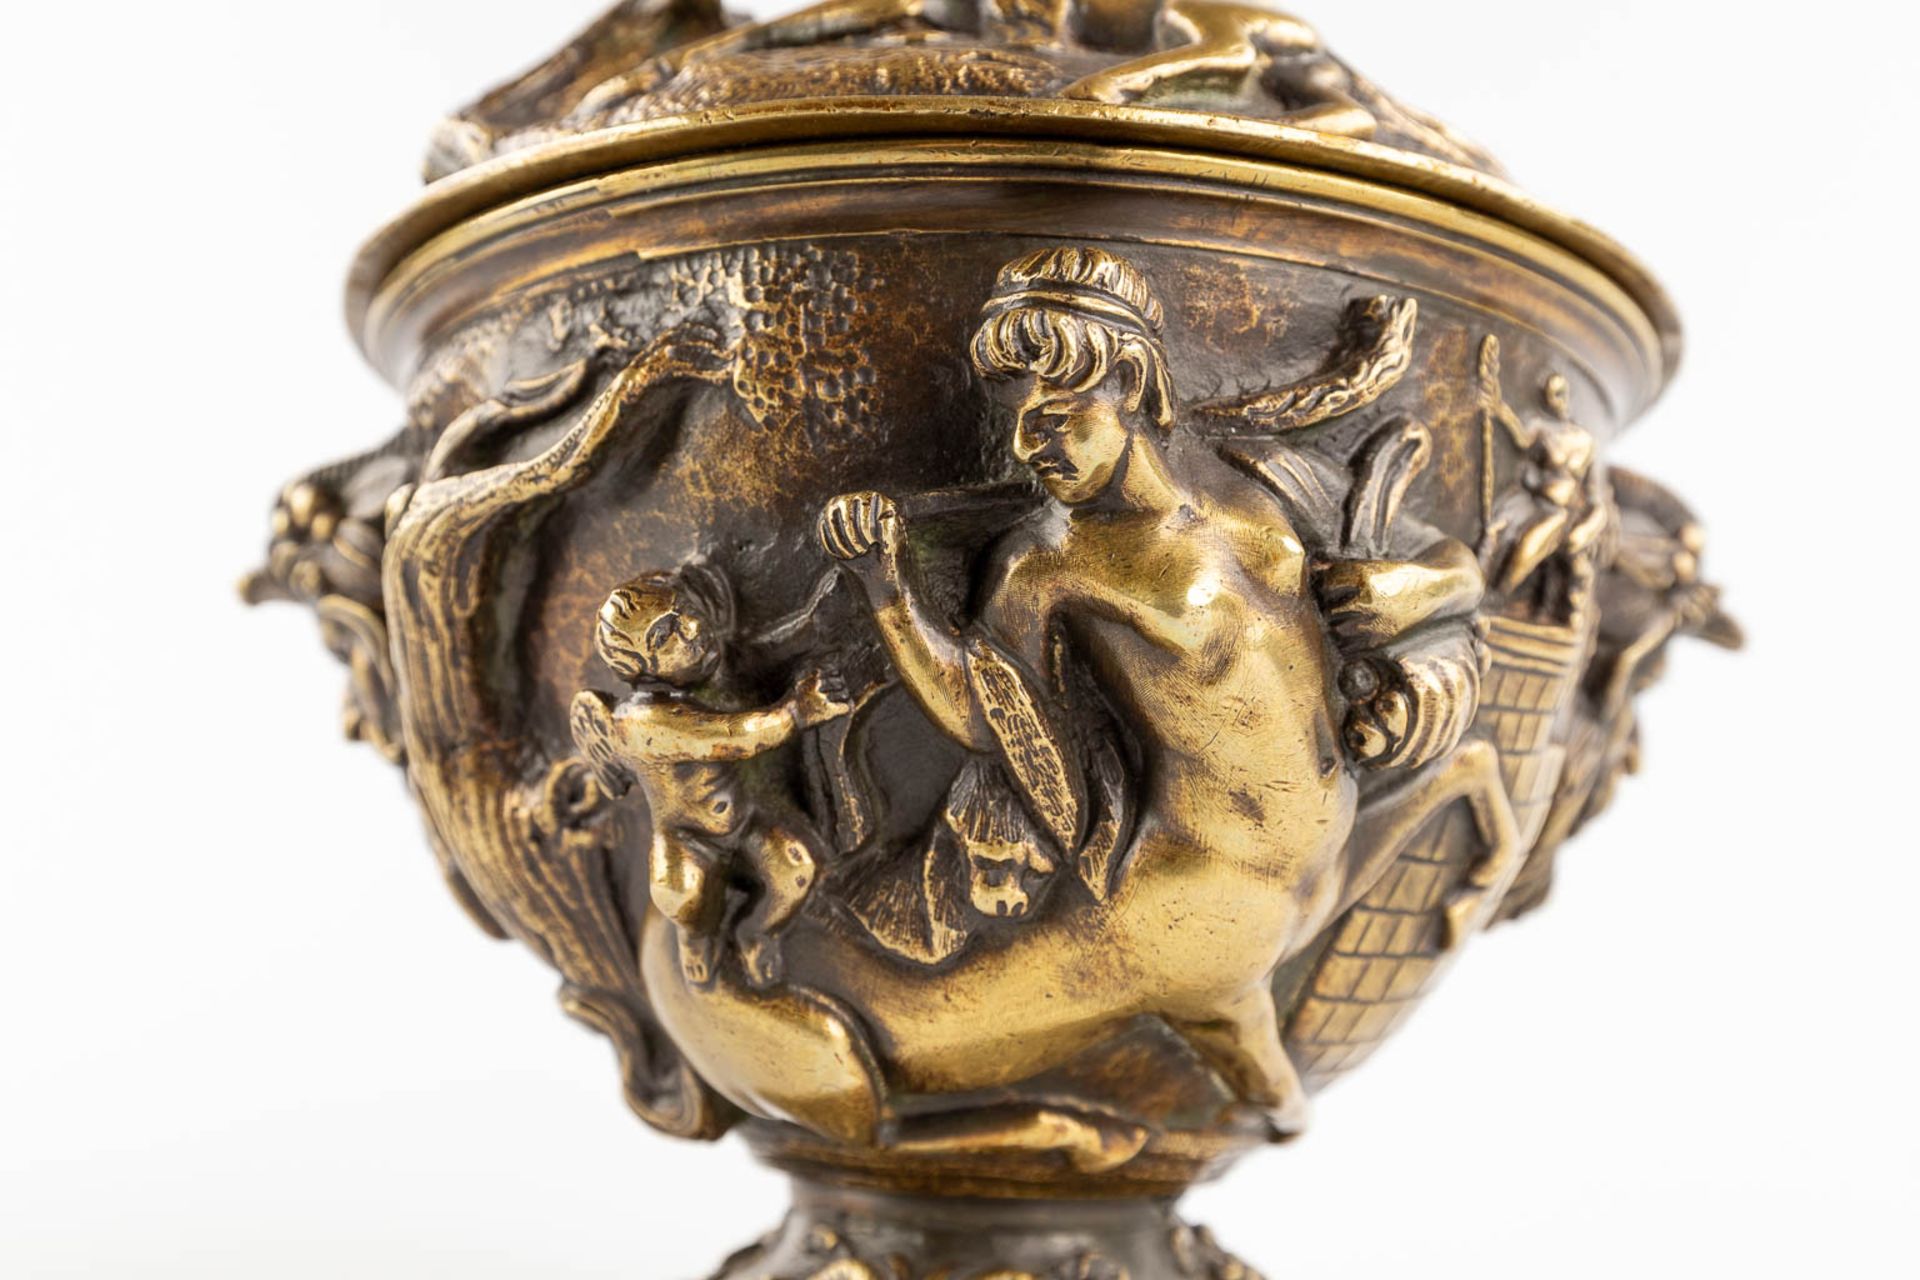 A pot with a lid, decorated with mythological figurines, patinated bronze. (H:23 x D:16 cm) - Image 13 of 16